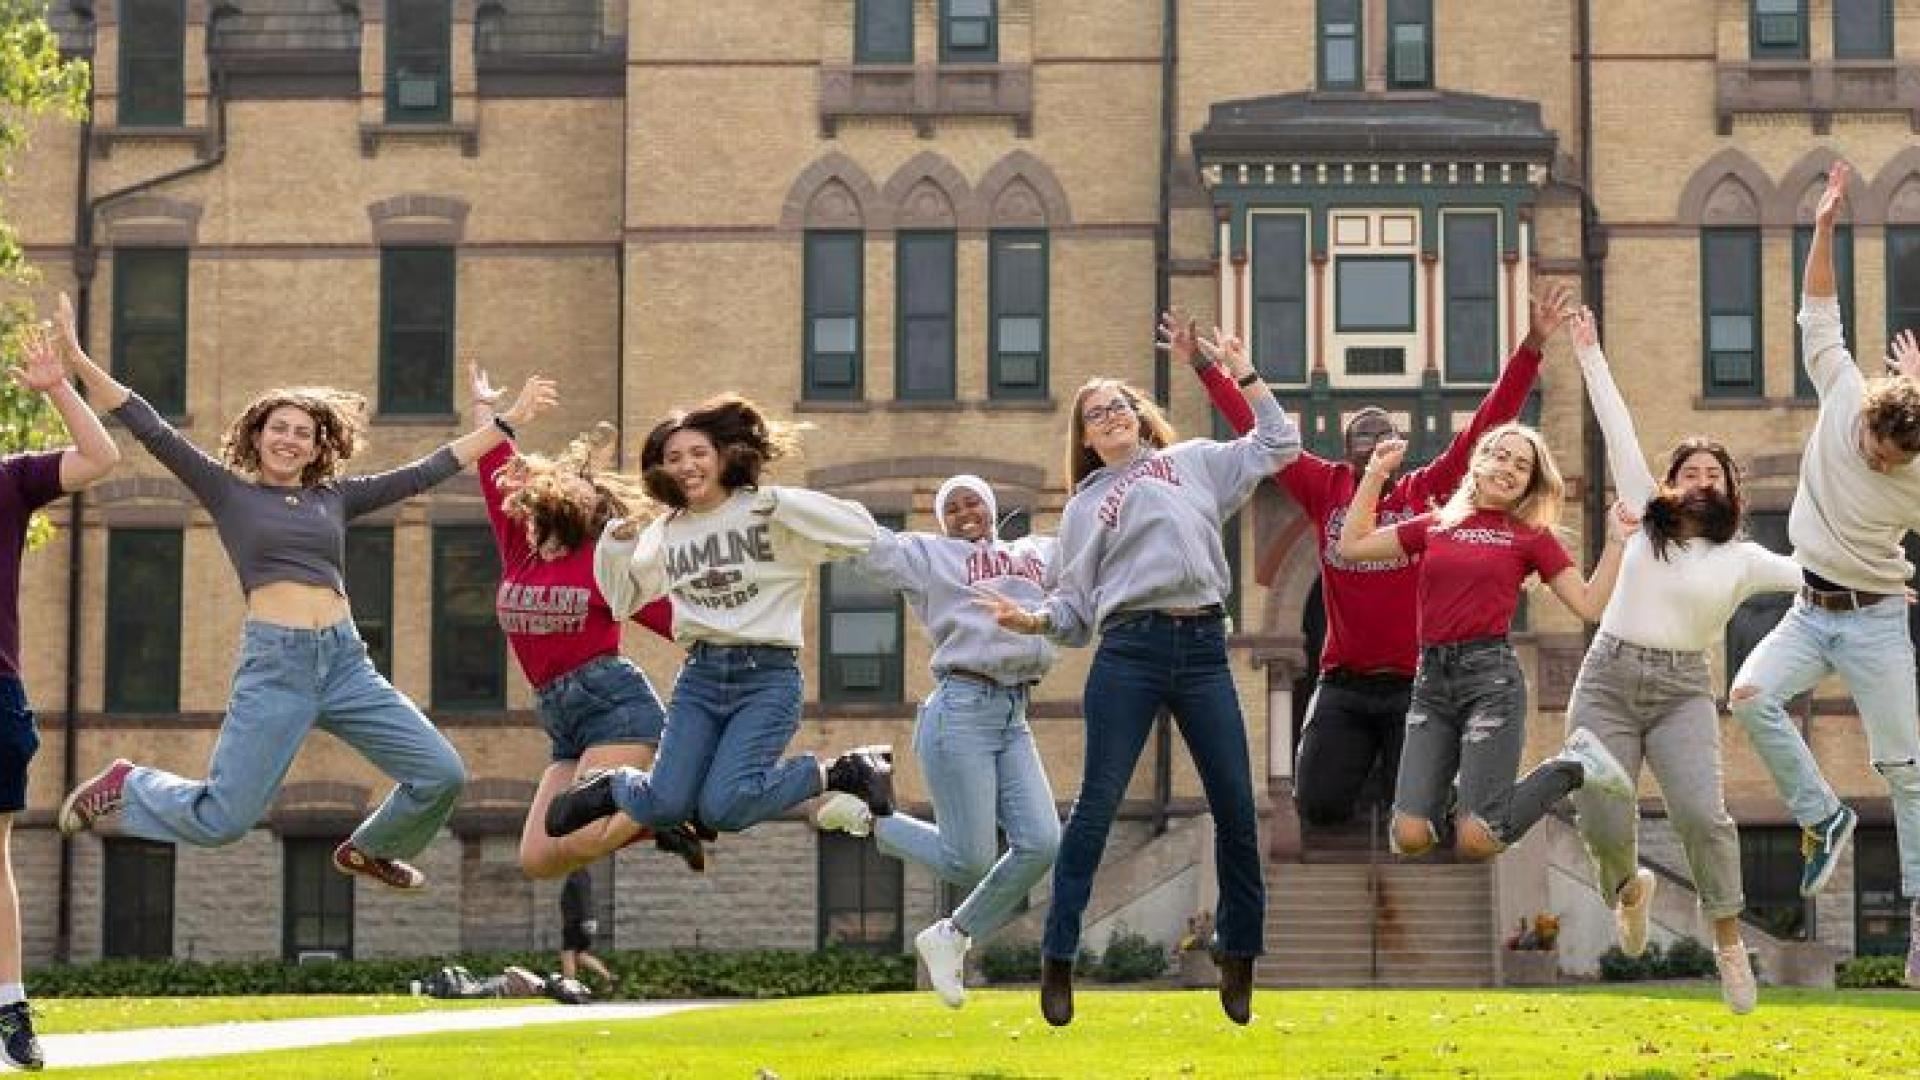 Students jumping in front of Hamline Old Main